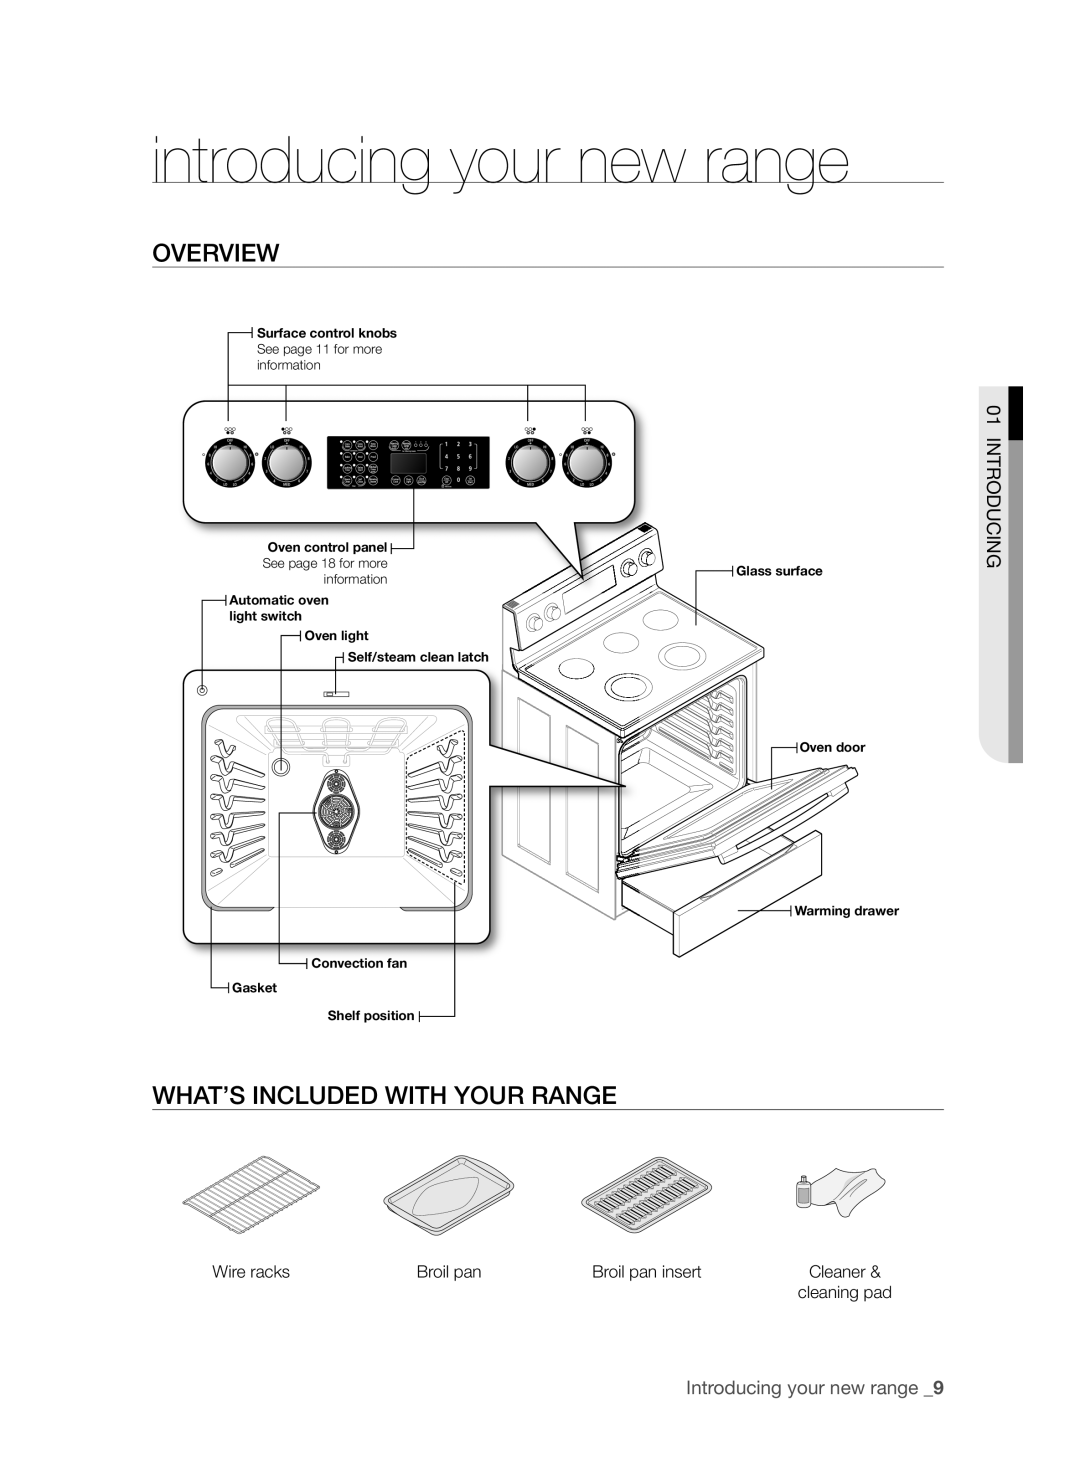 Samsung FTQ352IWB, FTQ352IWW user manual introducing your new range, Overview, What’S Included With Your Range, Introducing 